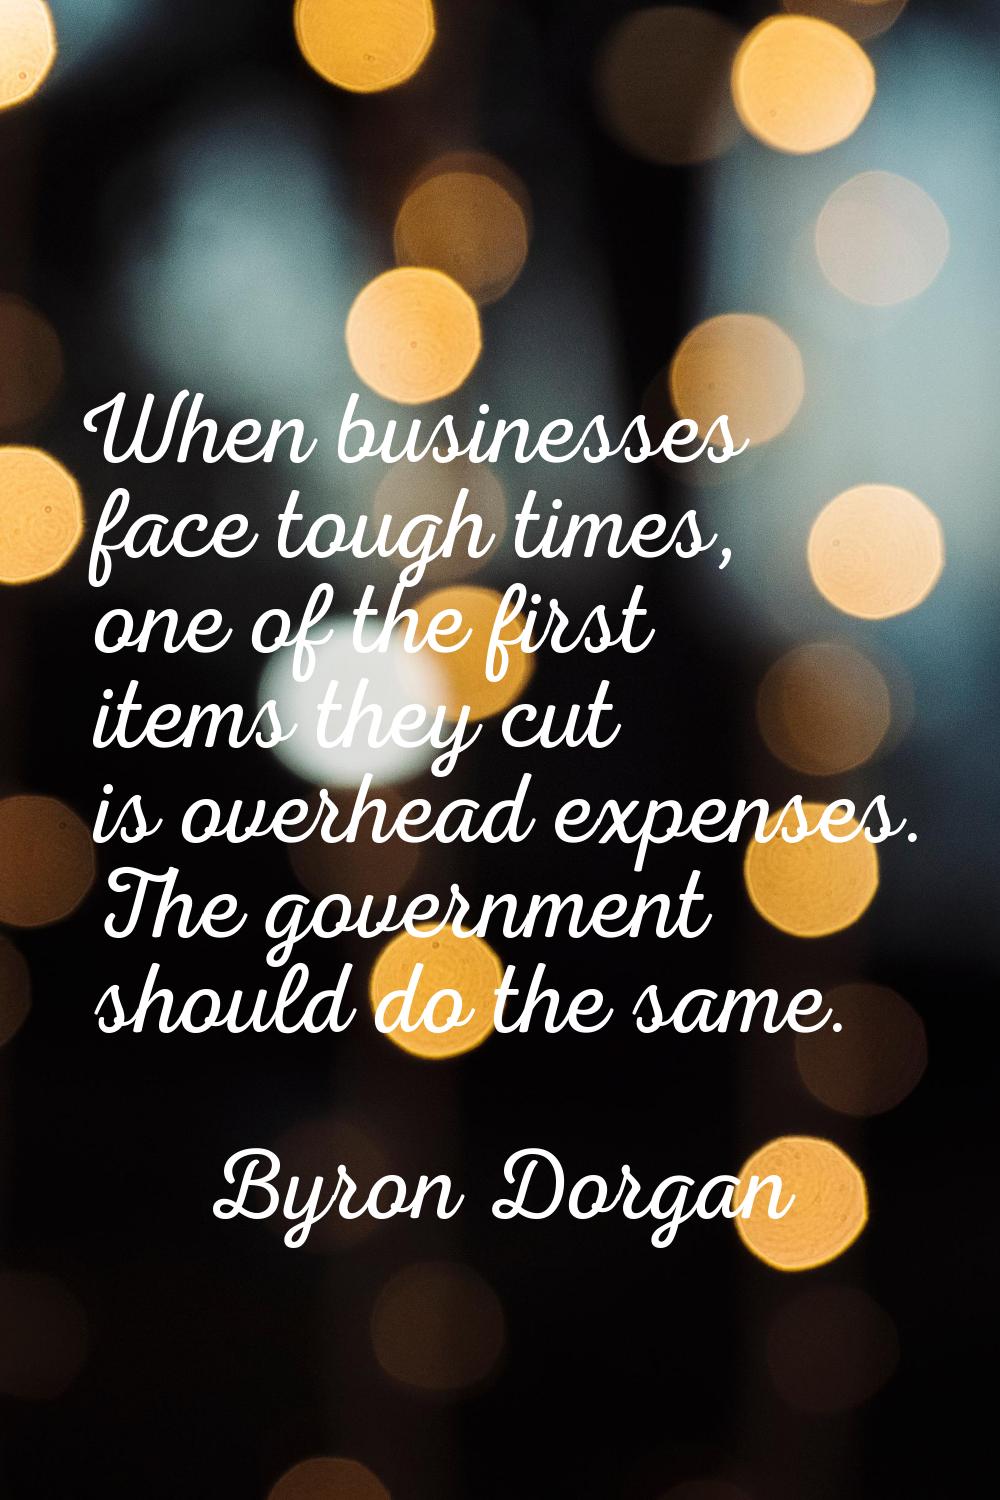 When businesses face tough times, one of the first items they cut is overhead expenses. The governm